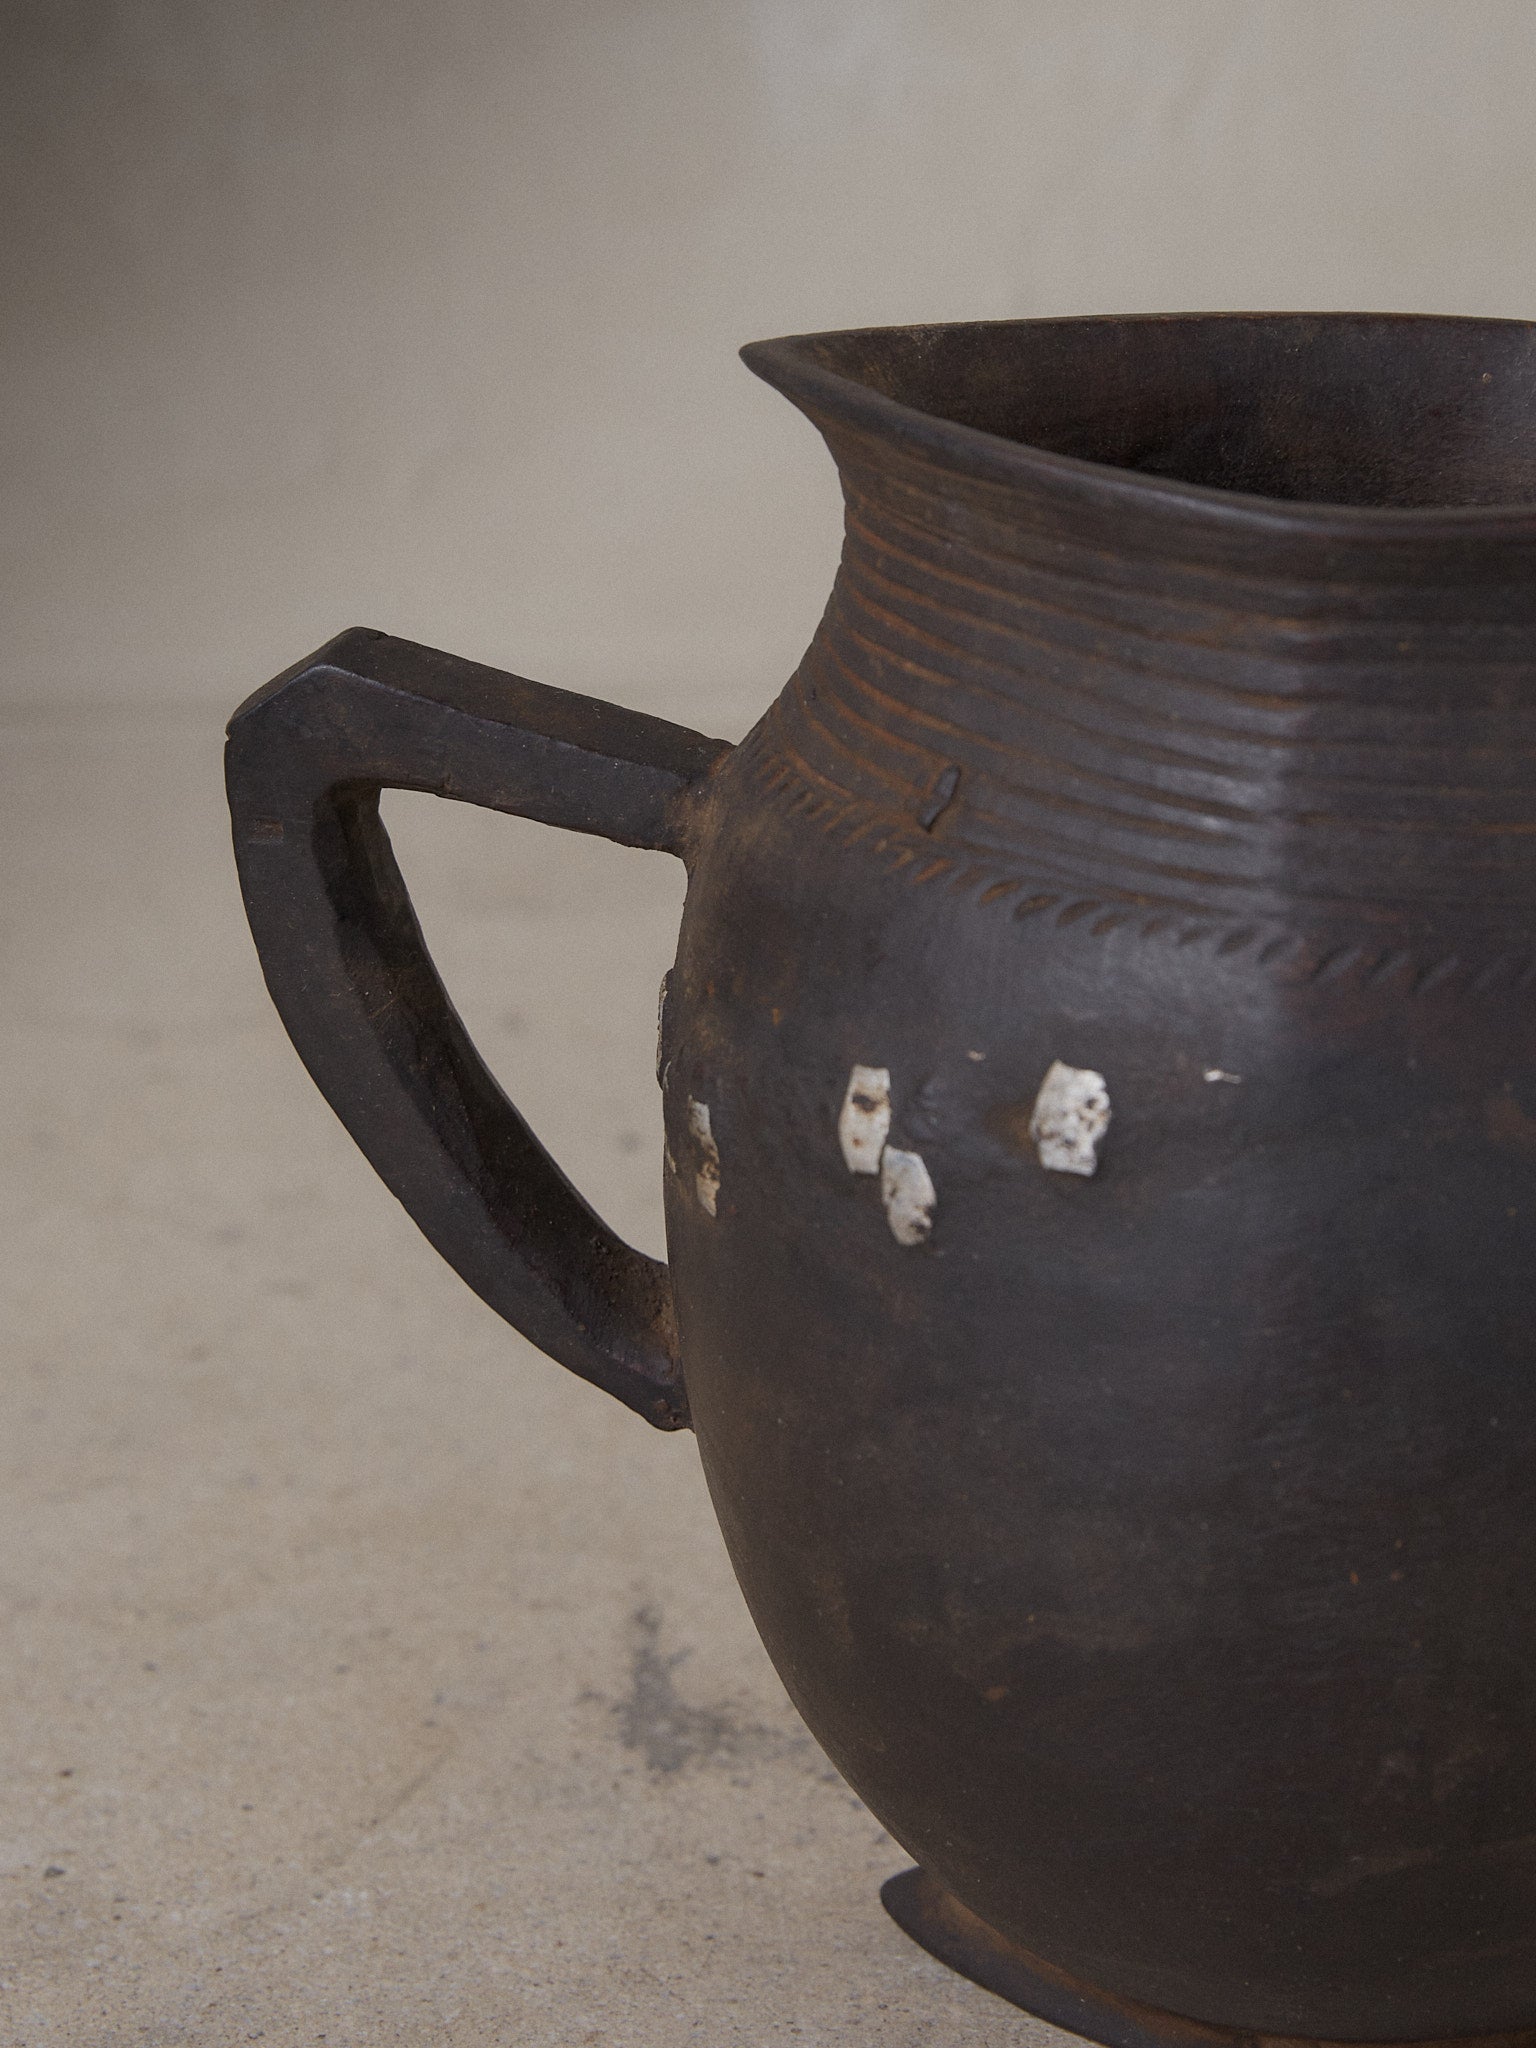 Anton Repair. Rare vintage find. Hand carved milk pitcher with artful etching and hand-forged metal repair details in dark natural wood.